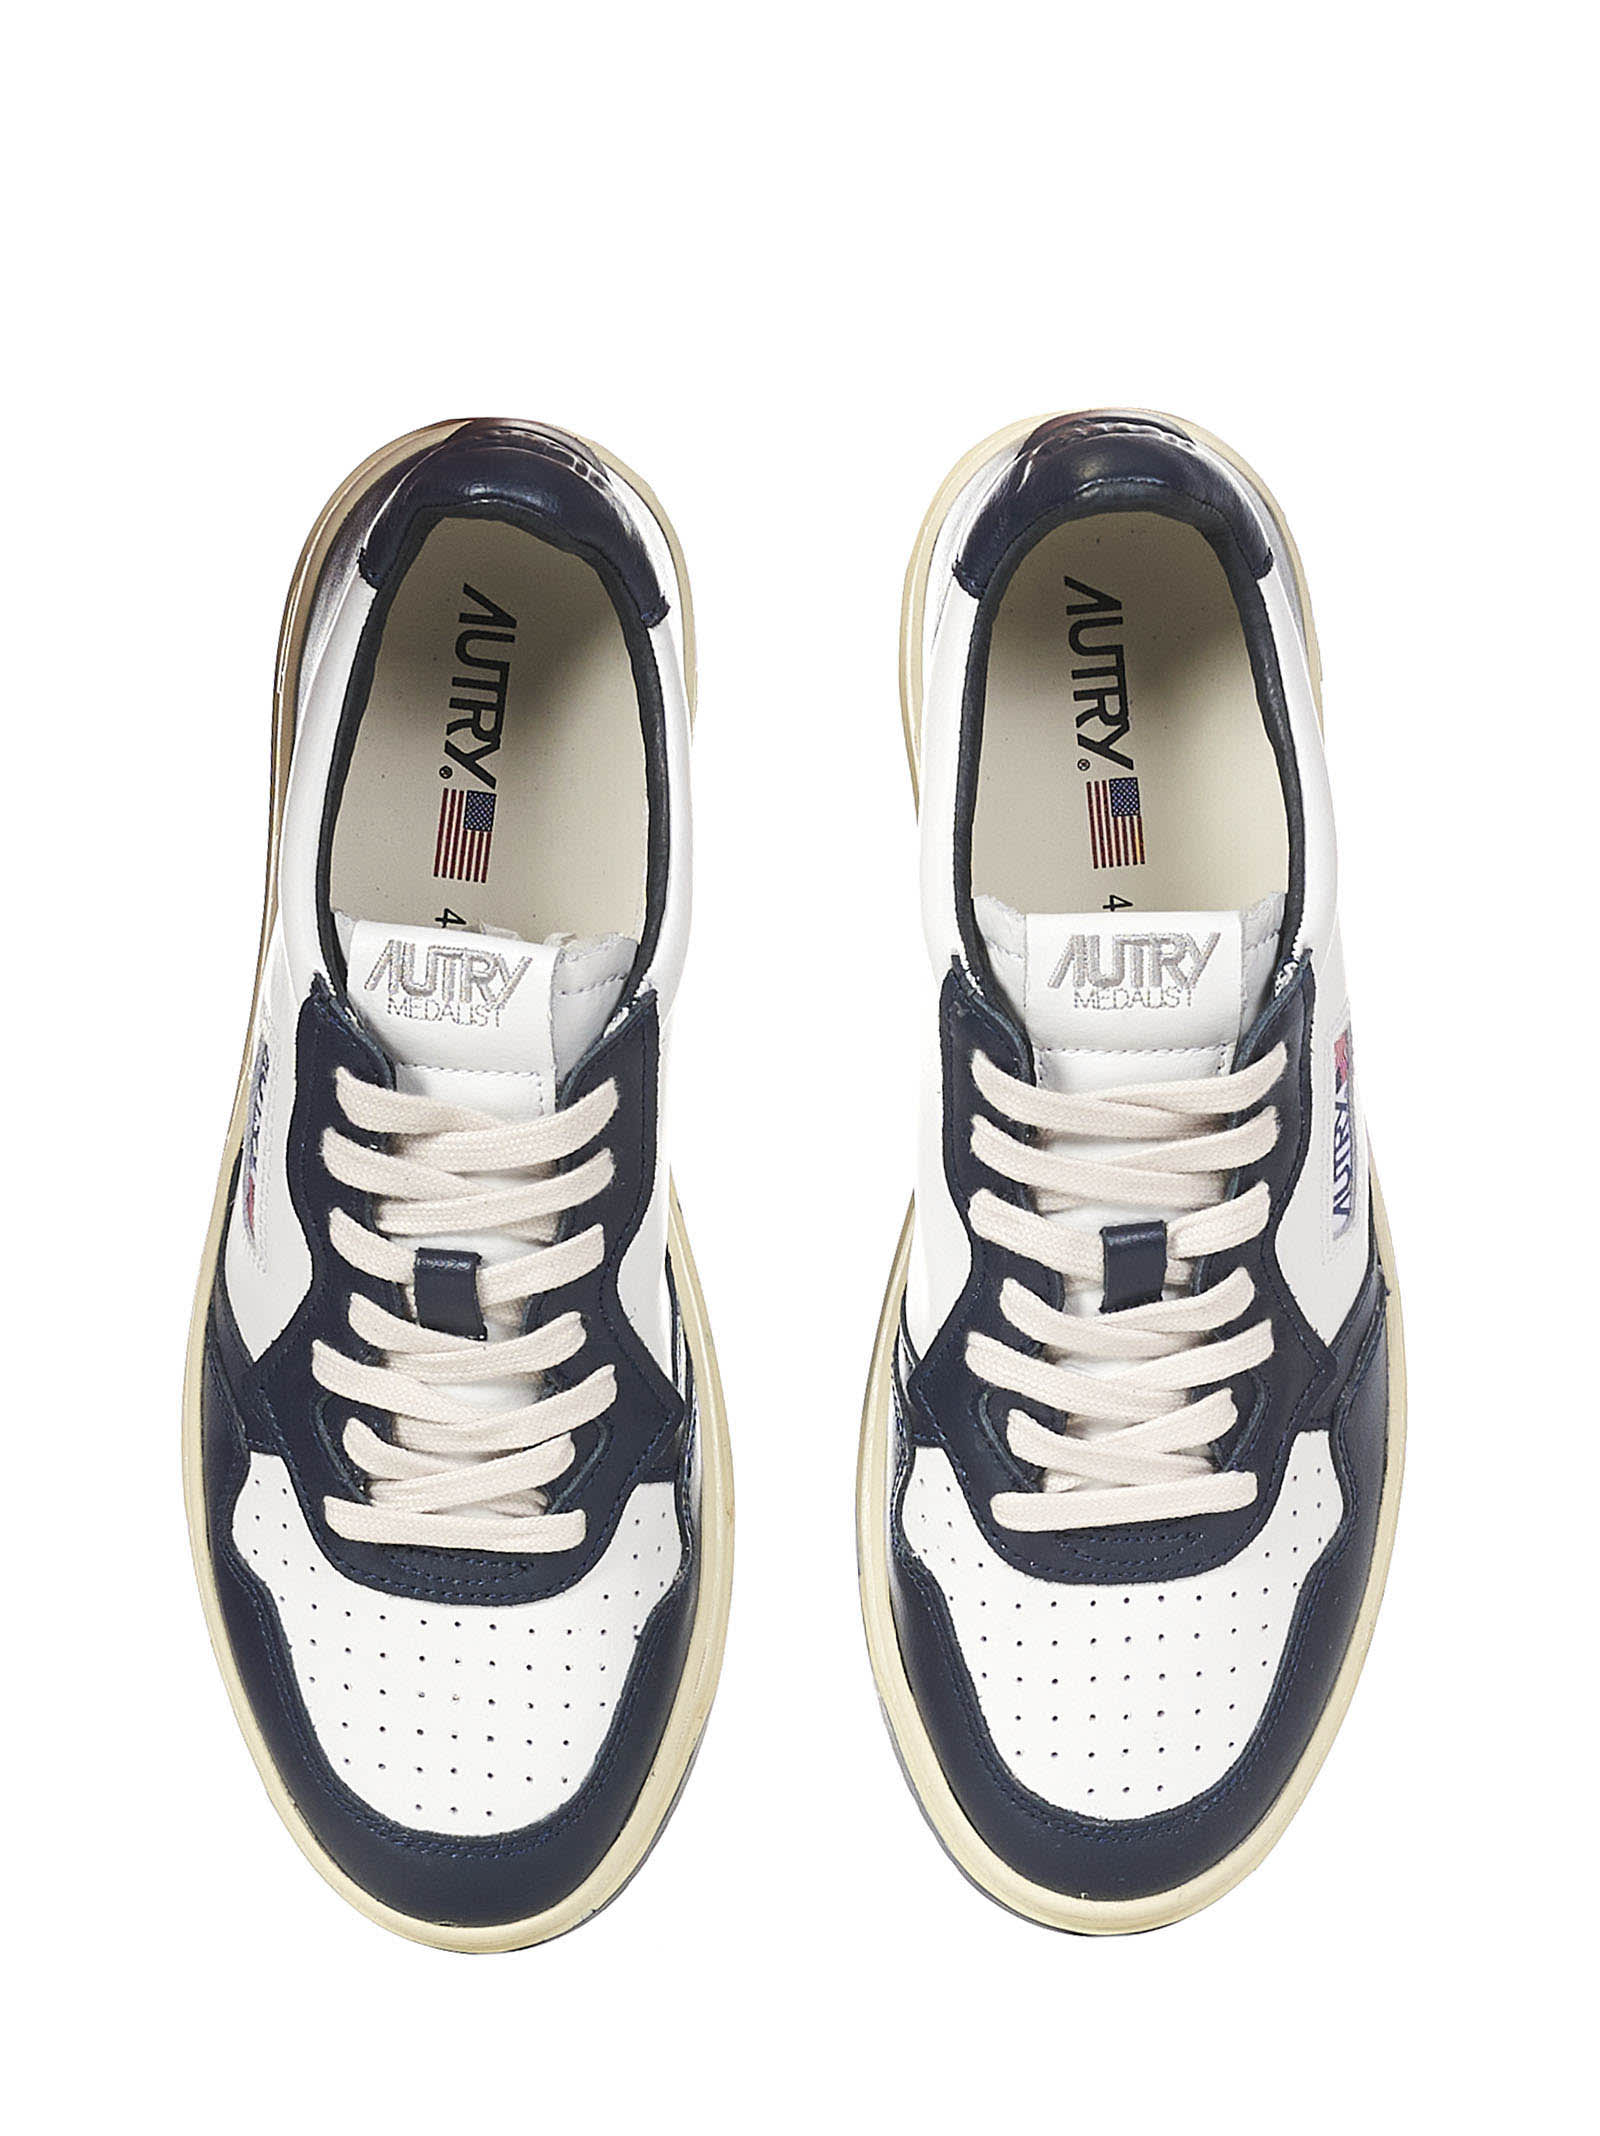 Shop Autry Action Medalist 1 Low Sneakers In Bianco Blu